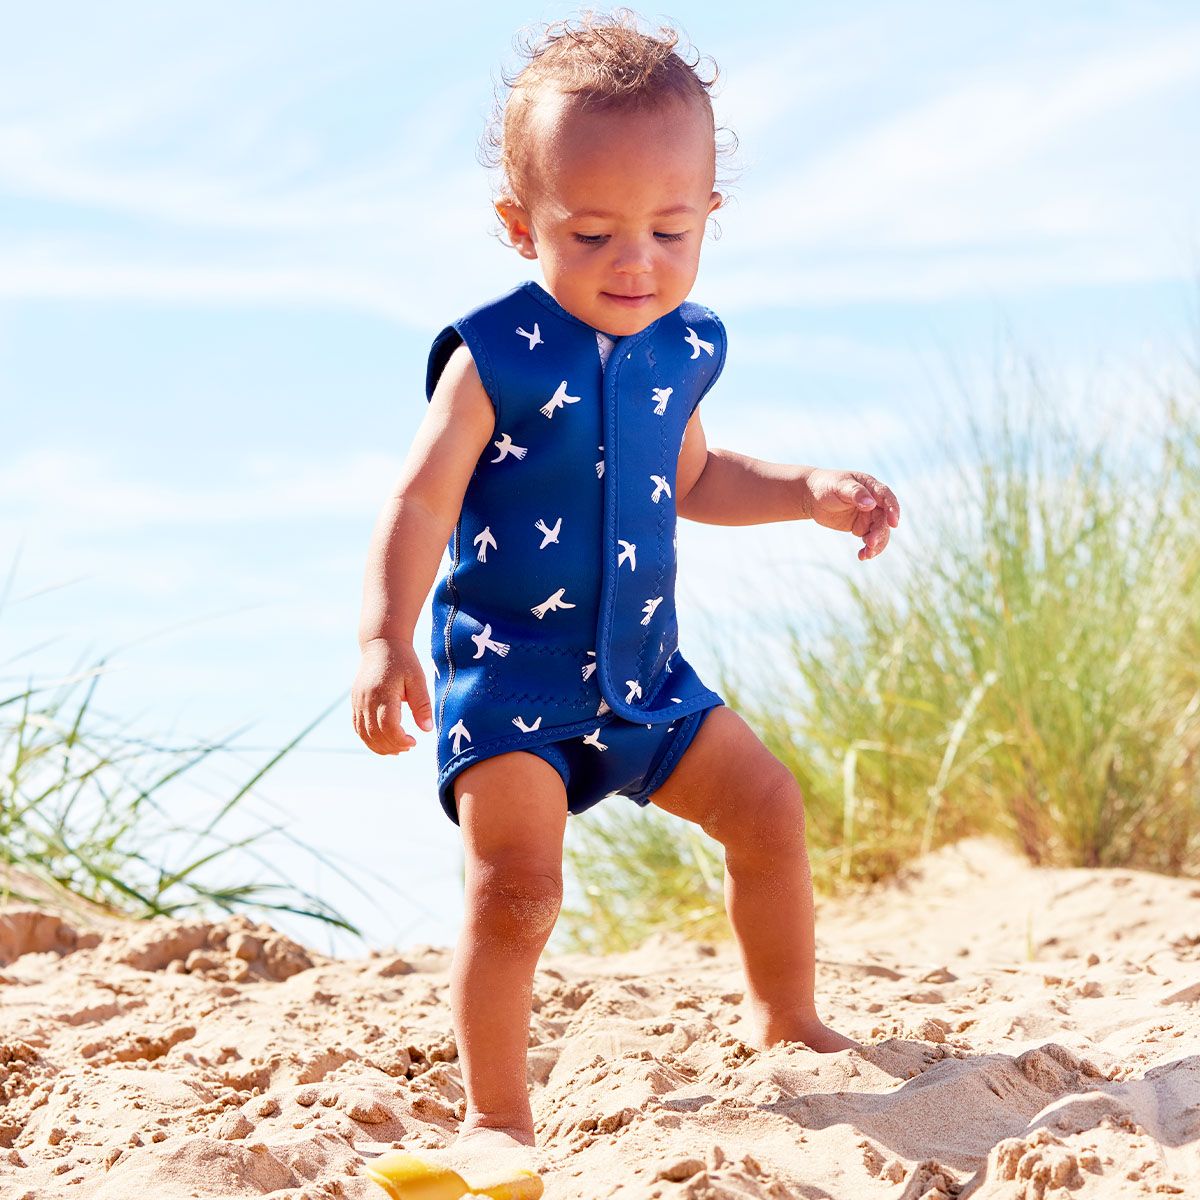 Lifestyle image of toddler wearing a Baby Wrap wetsuit in navy blue with white doves themed print.